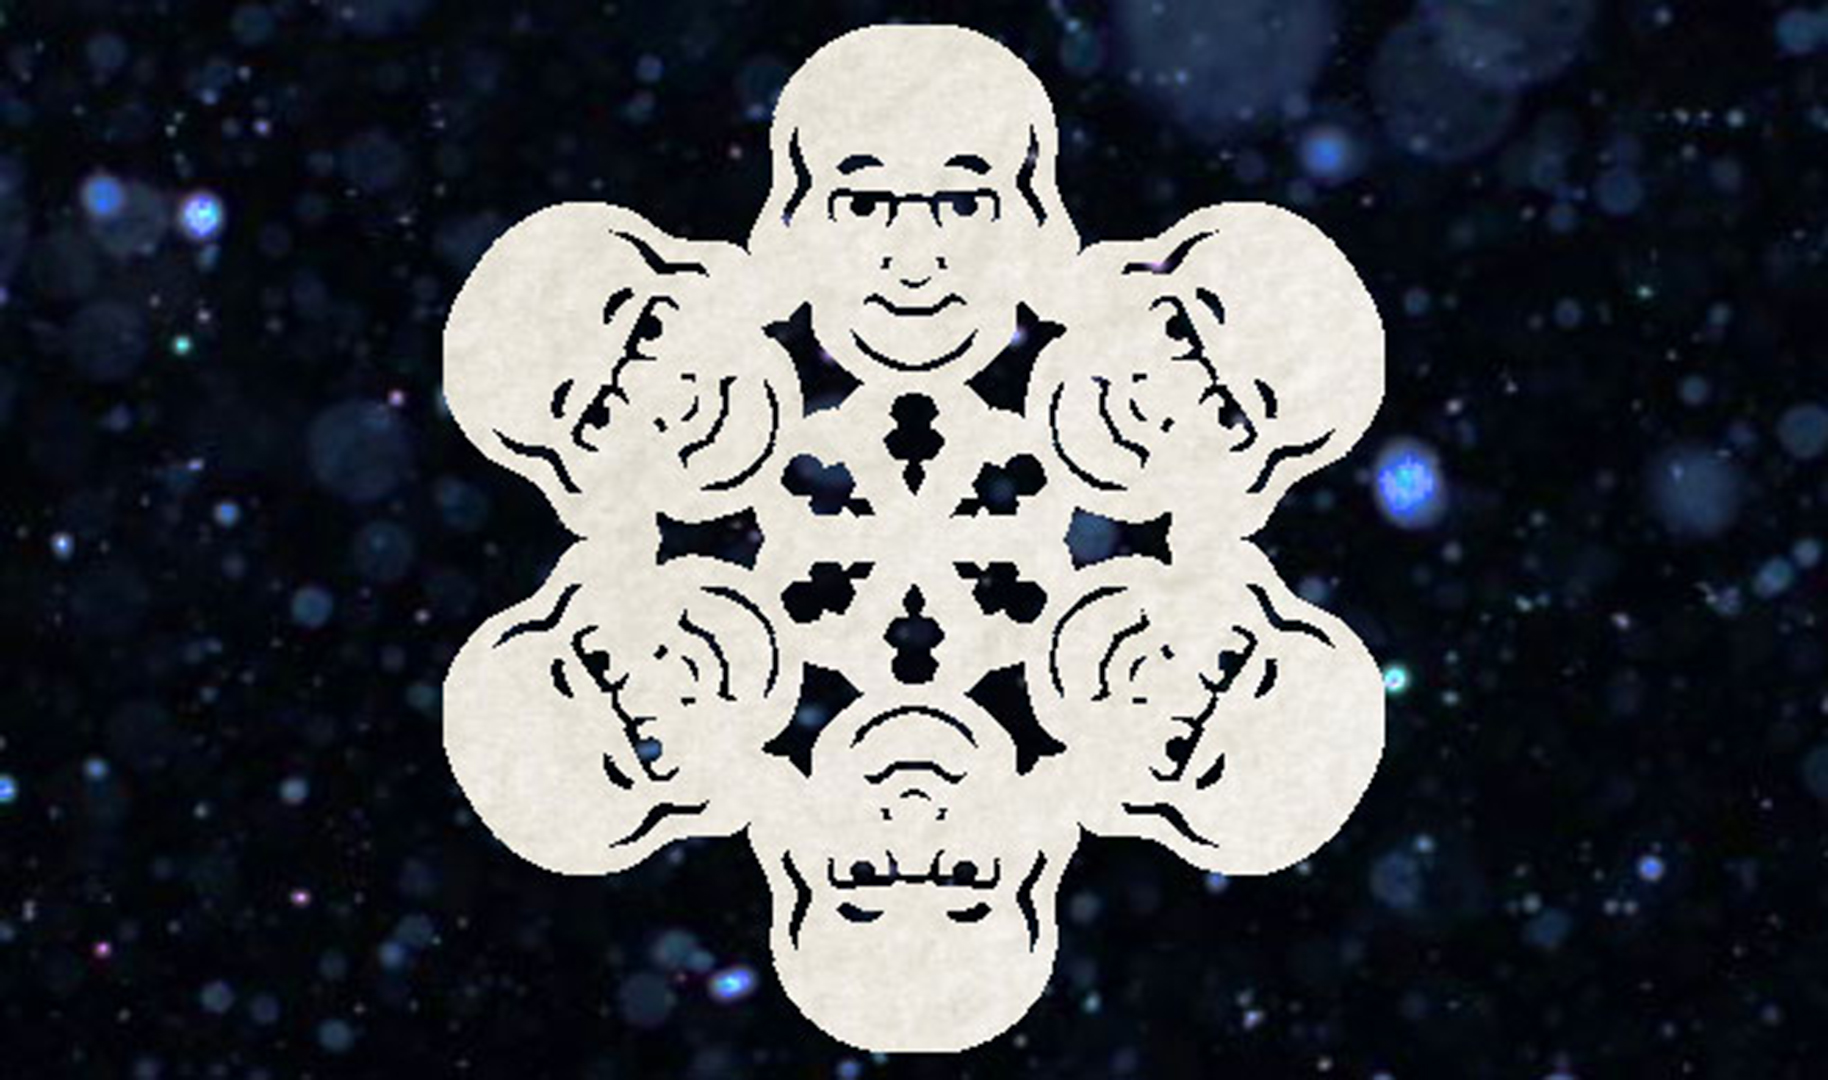 What Are Snowflakes?  Center for Science Education